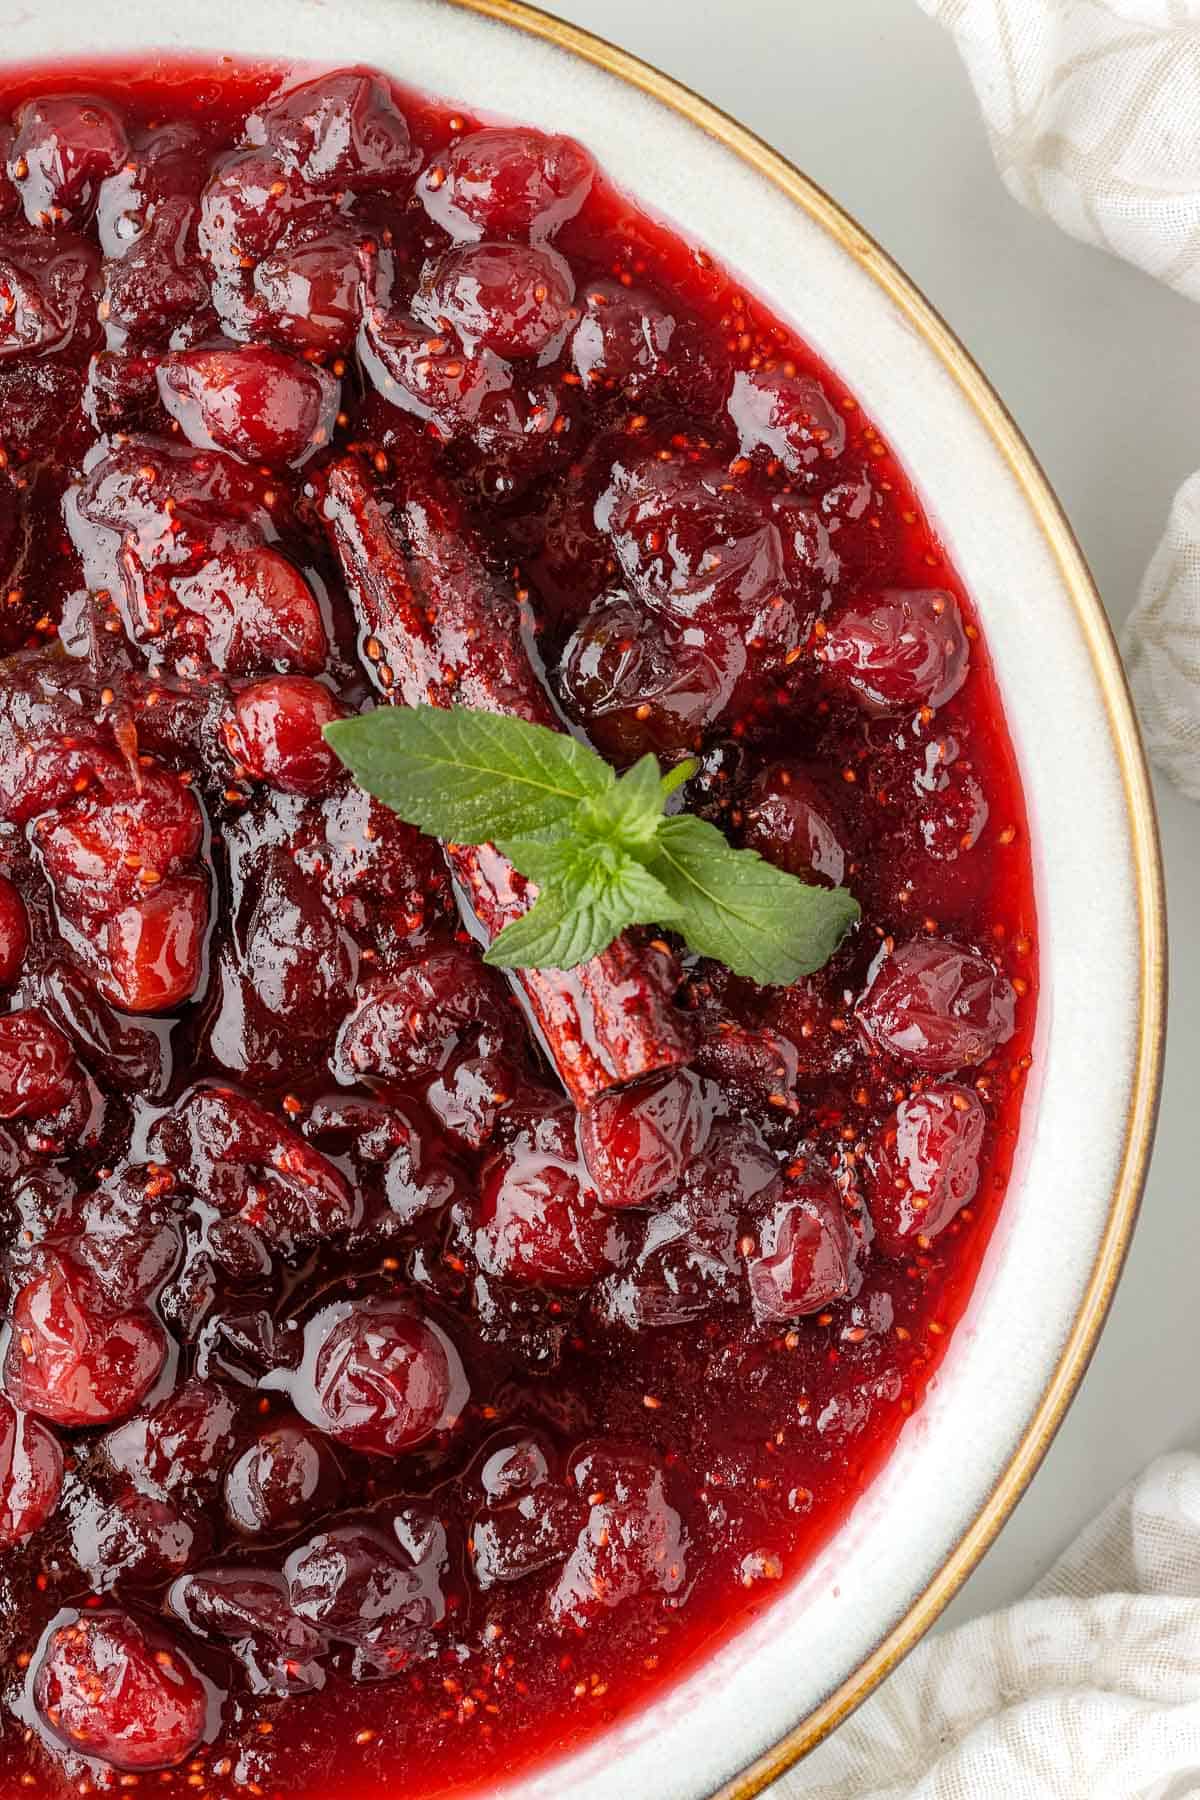 a bowl of homemade cranberry sauce, garnished with fresh mint and cinnamon